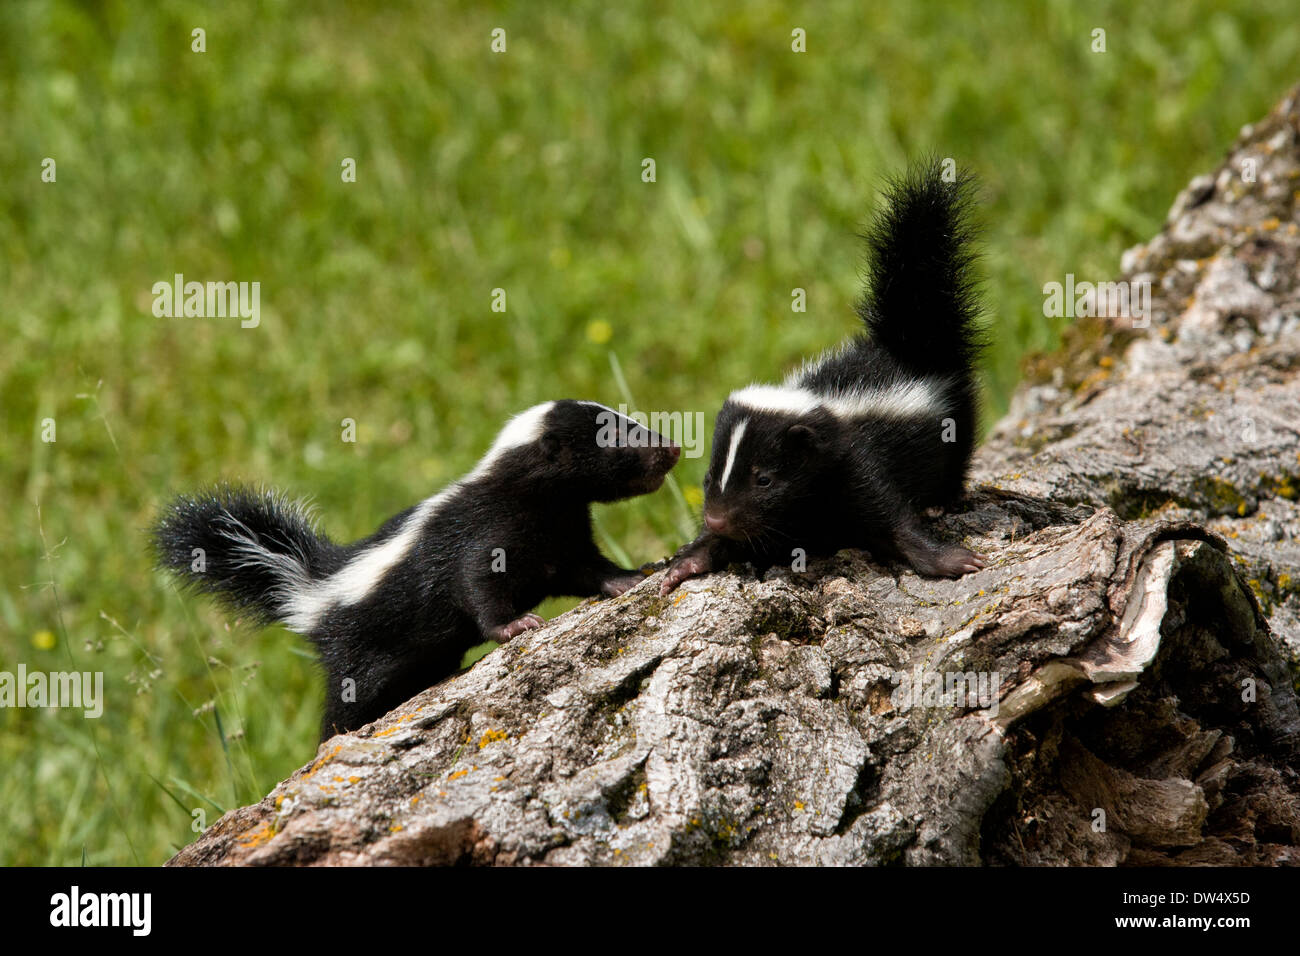 Baby skunks exploring a log together Stock Photo